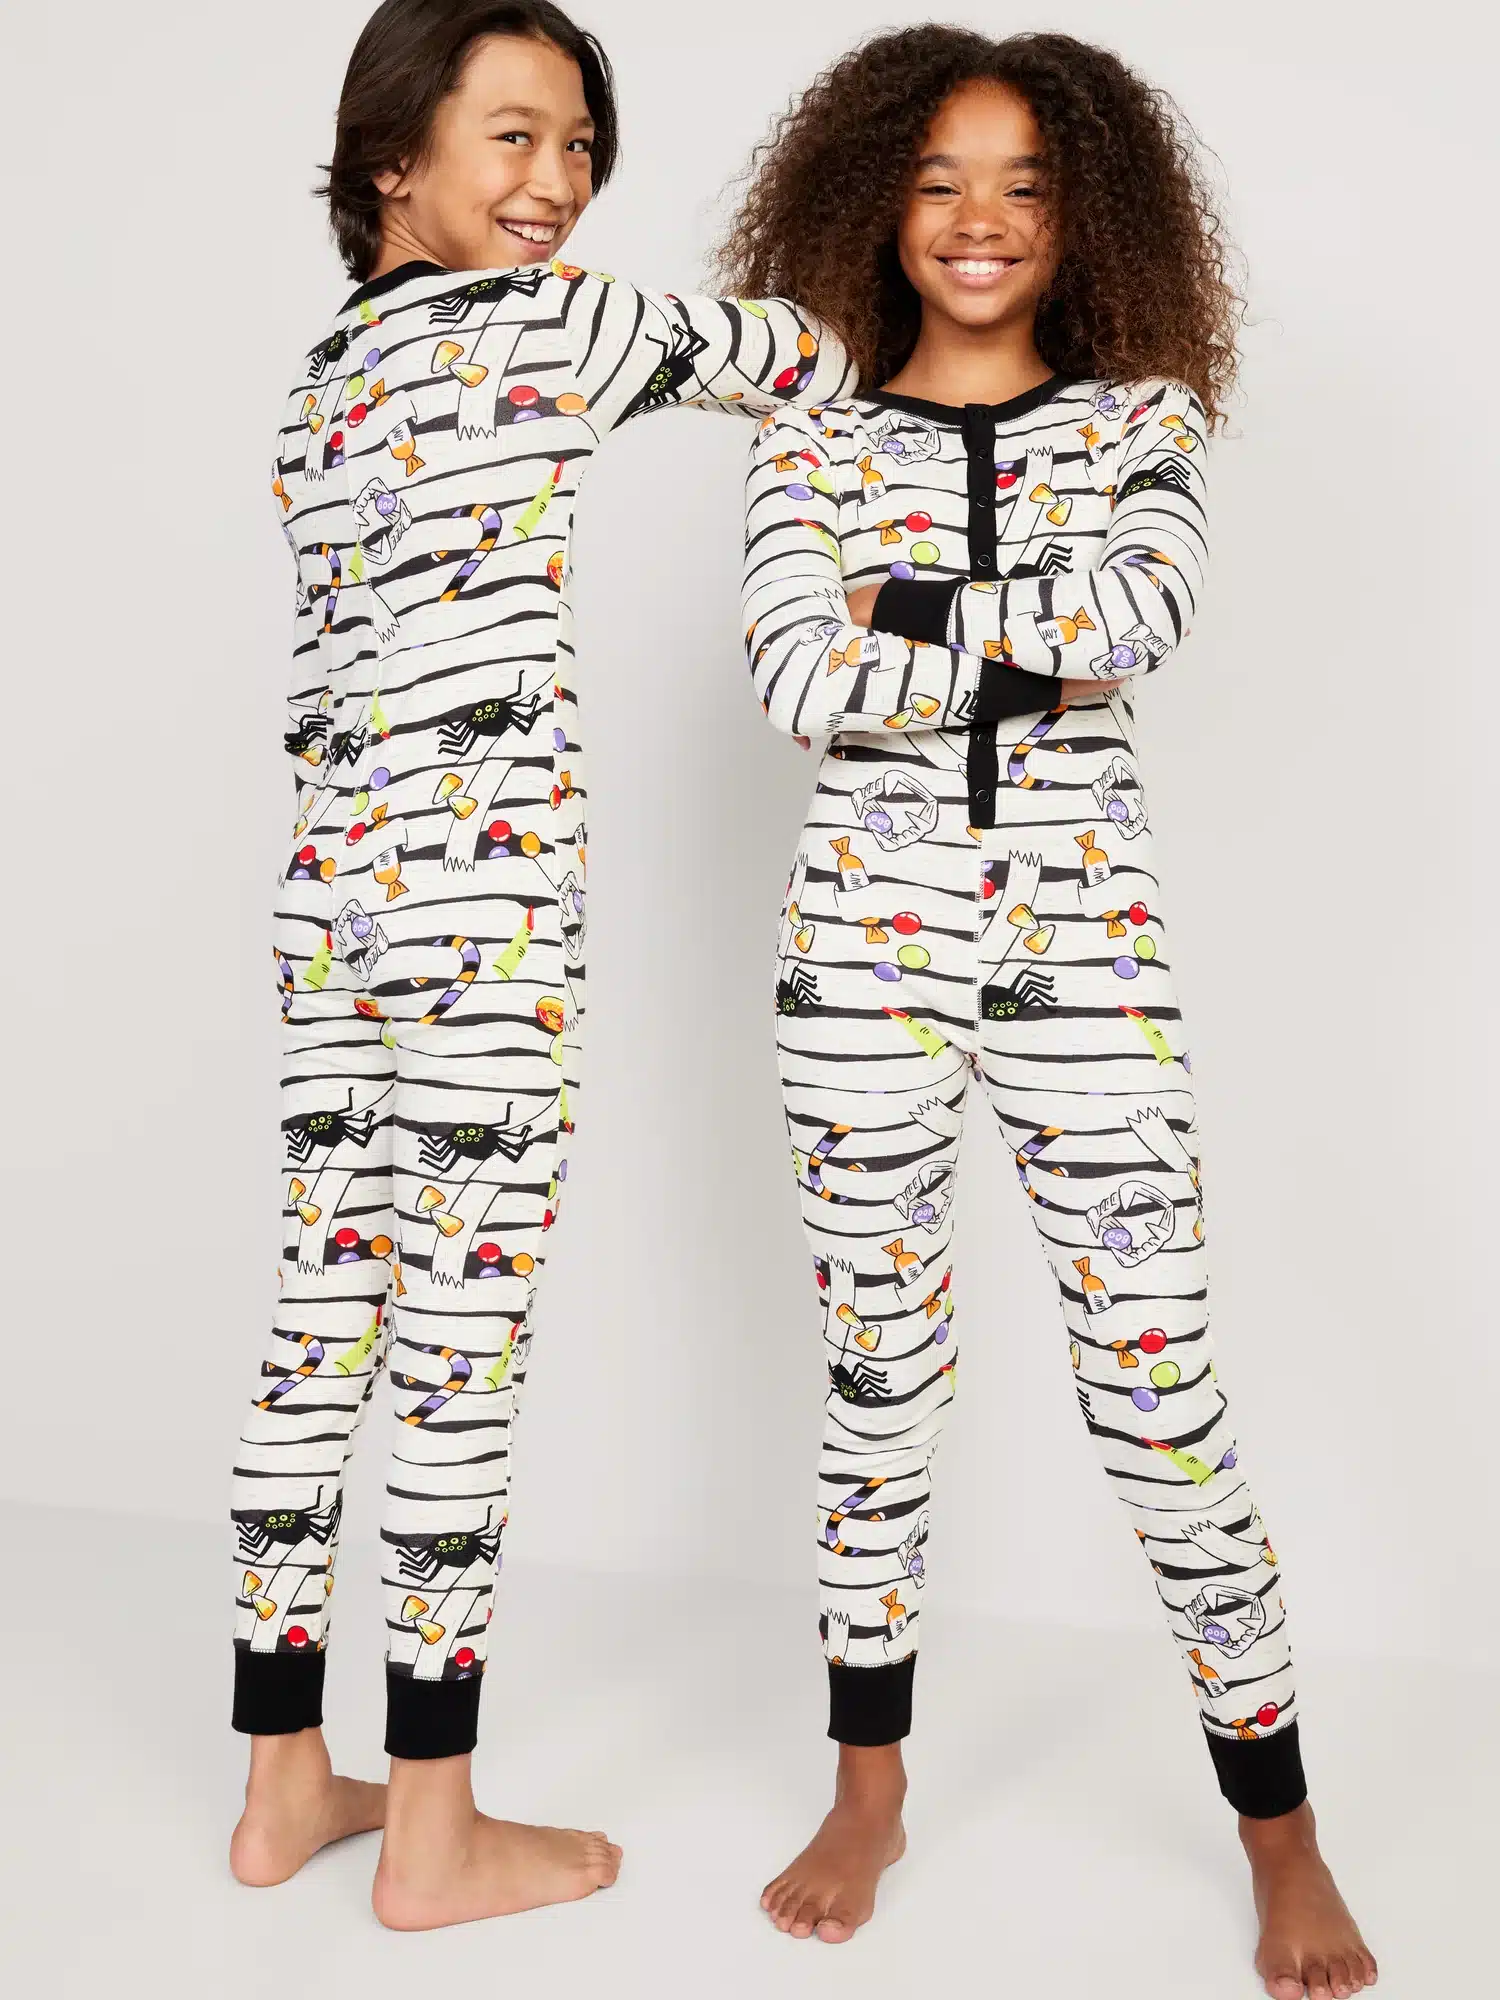 Gender-Neutral Matching Snug-Fit One-Piece Pajamas for Kids